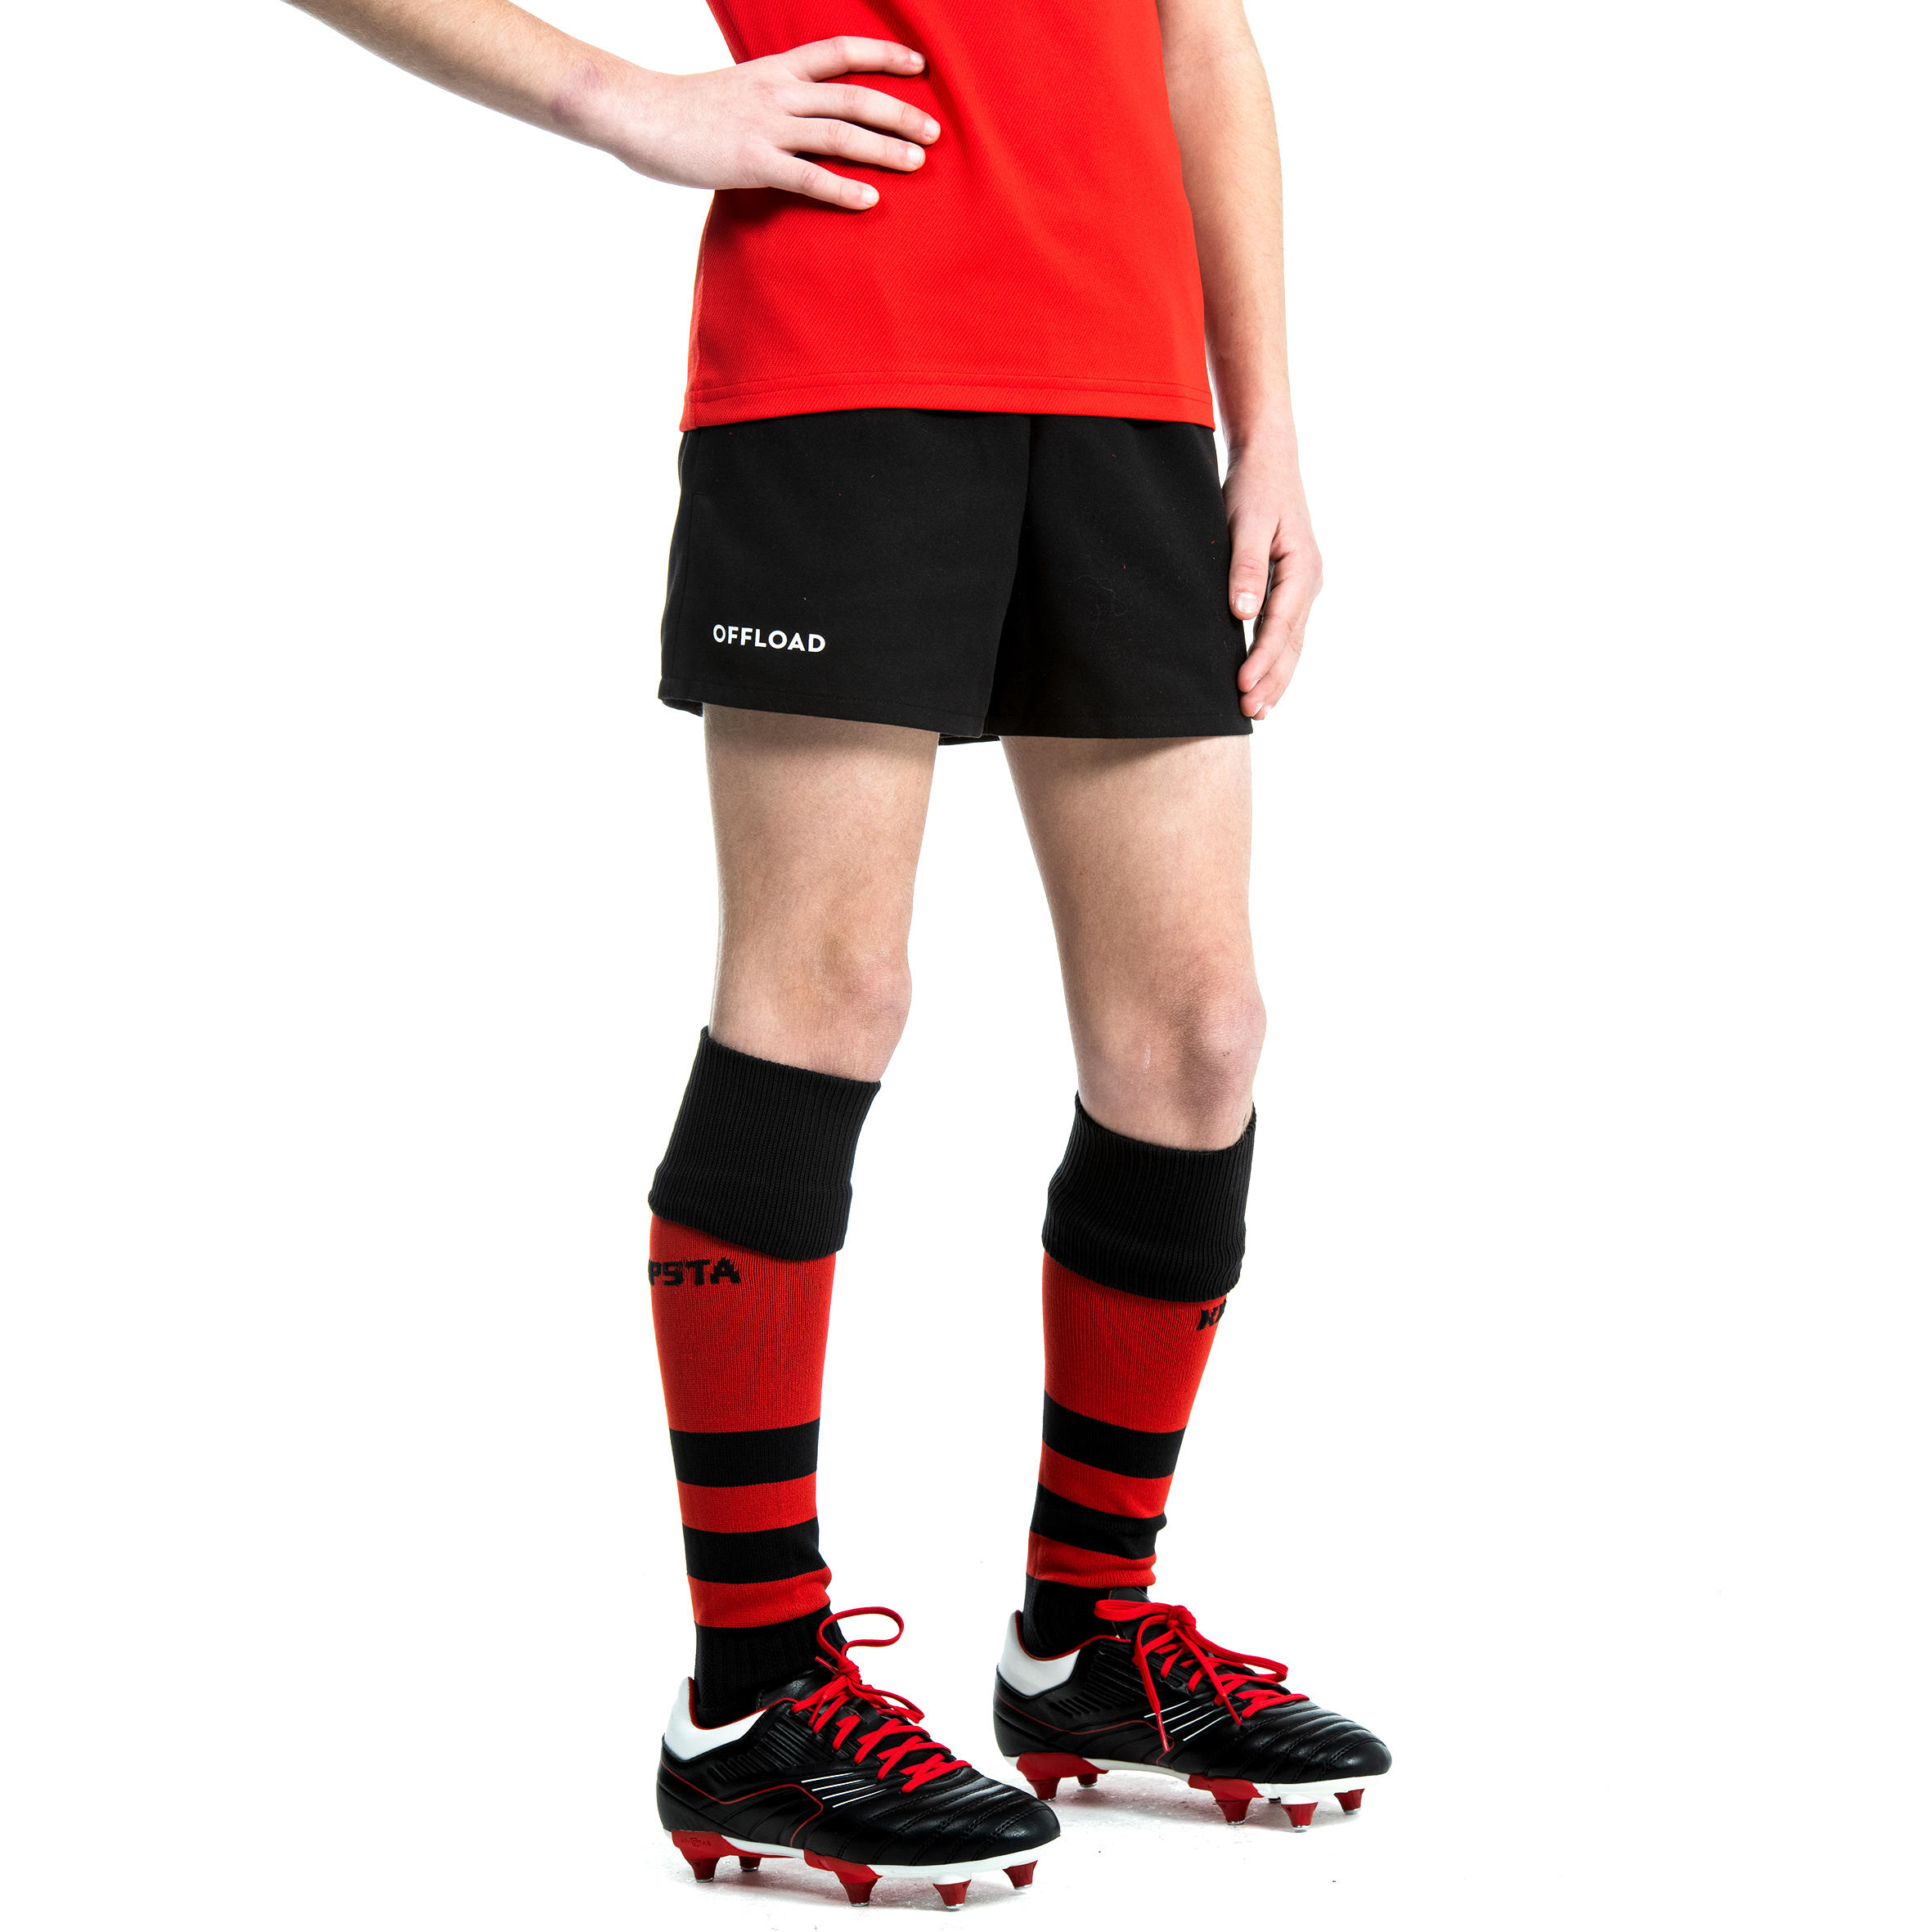 Kids' Rugby Shorts with Pockets R100 - Black 6/6